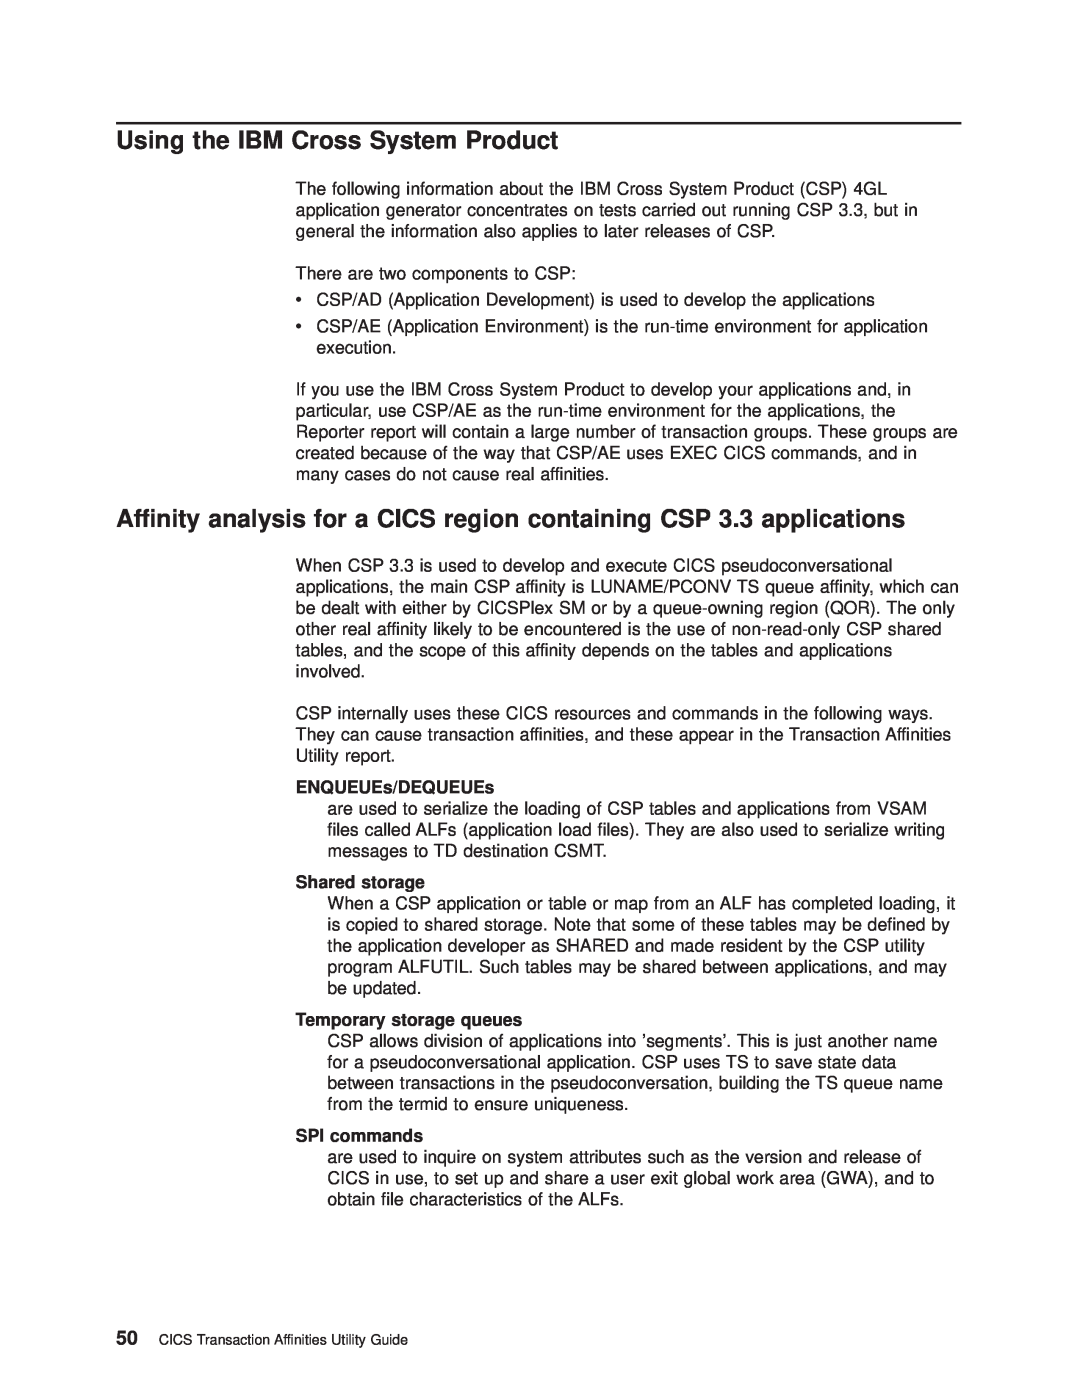 IBM OS manual Using the IBM Cross System Product, Affinity analysis for a CICS region containing CSP 3.3 applications 